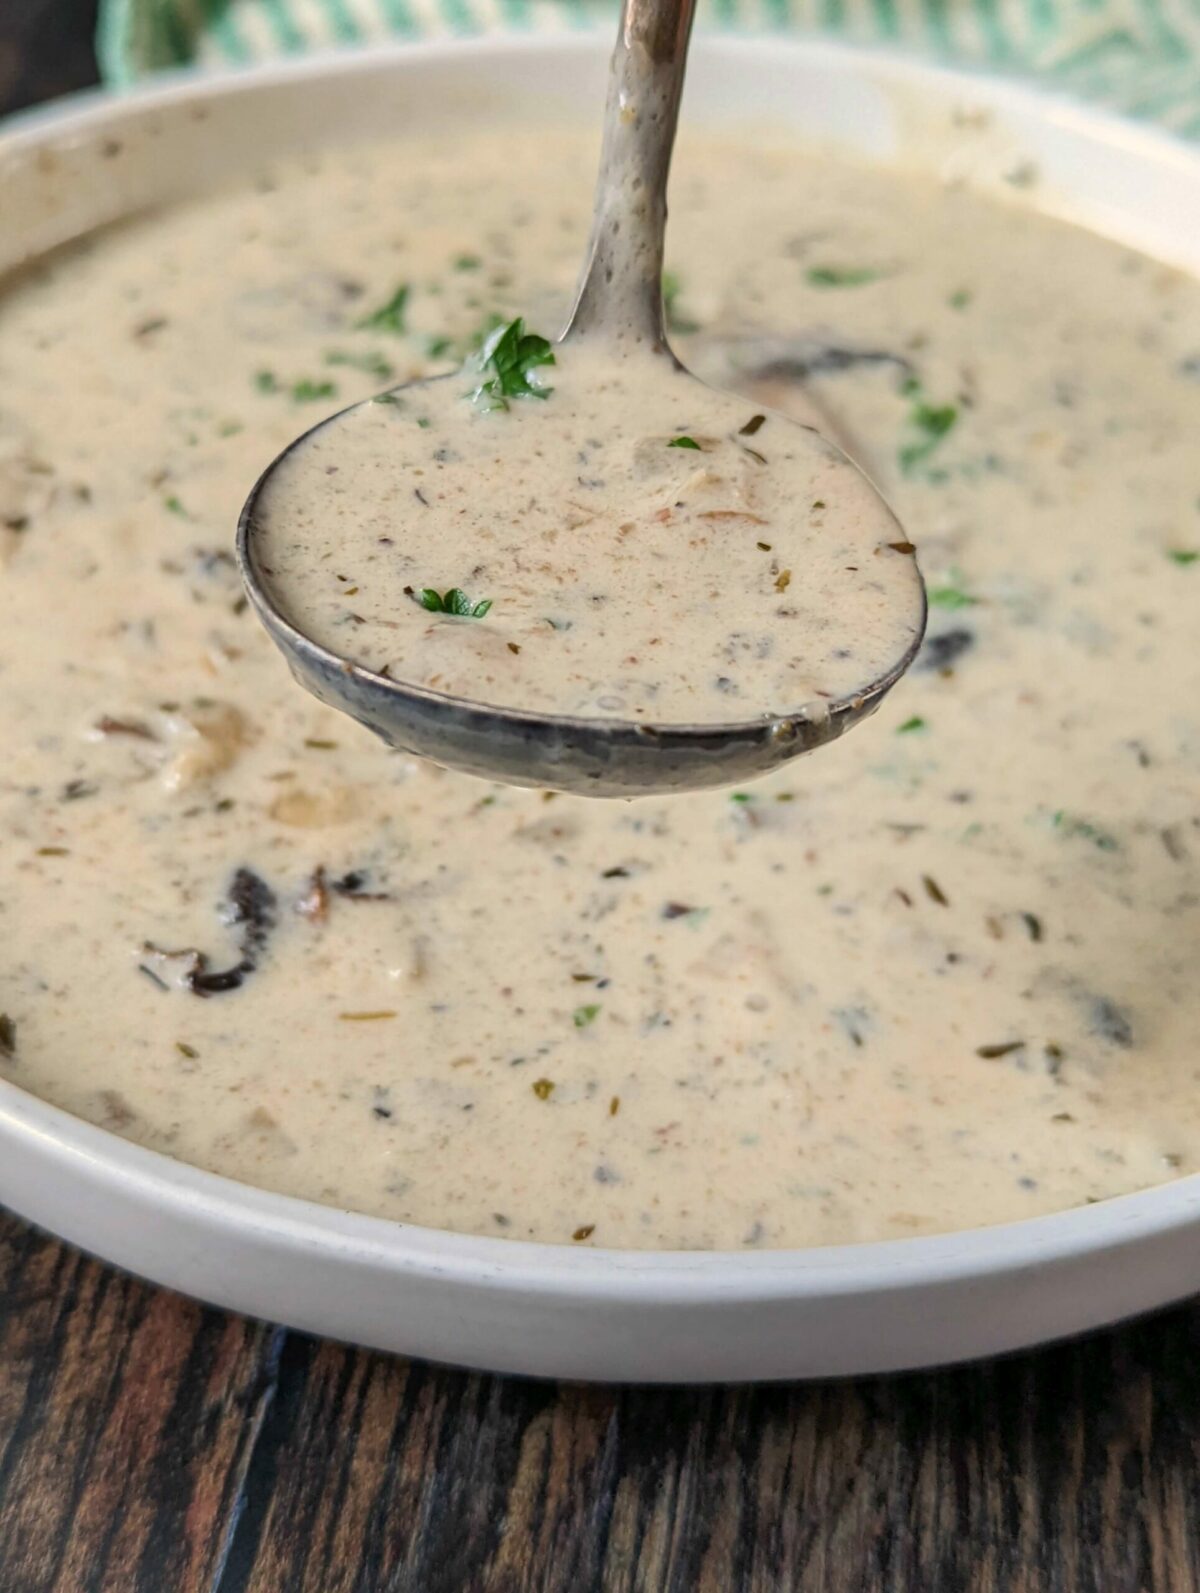 Keto cream of mushroom soup in a bowl with parsley.